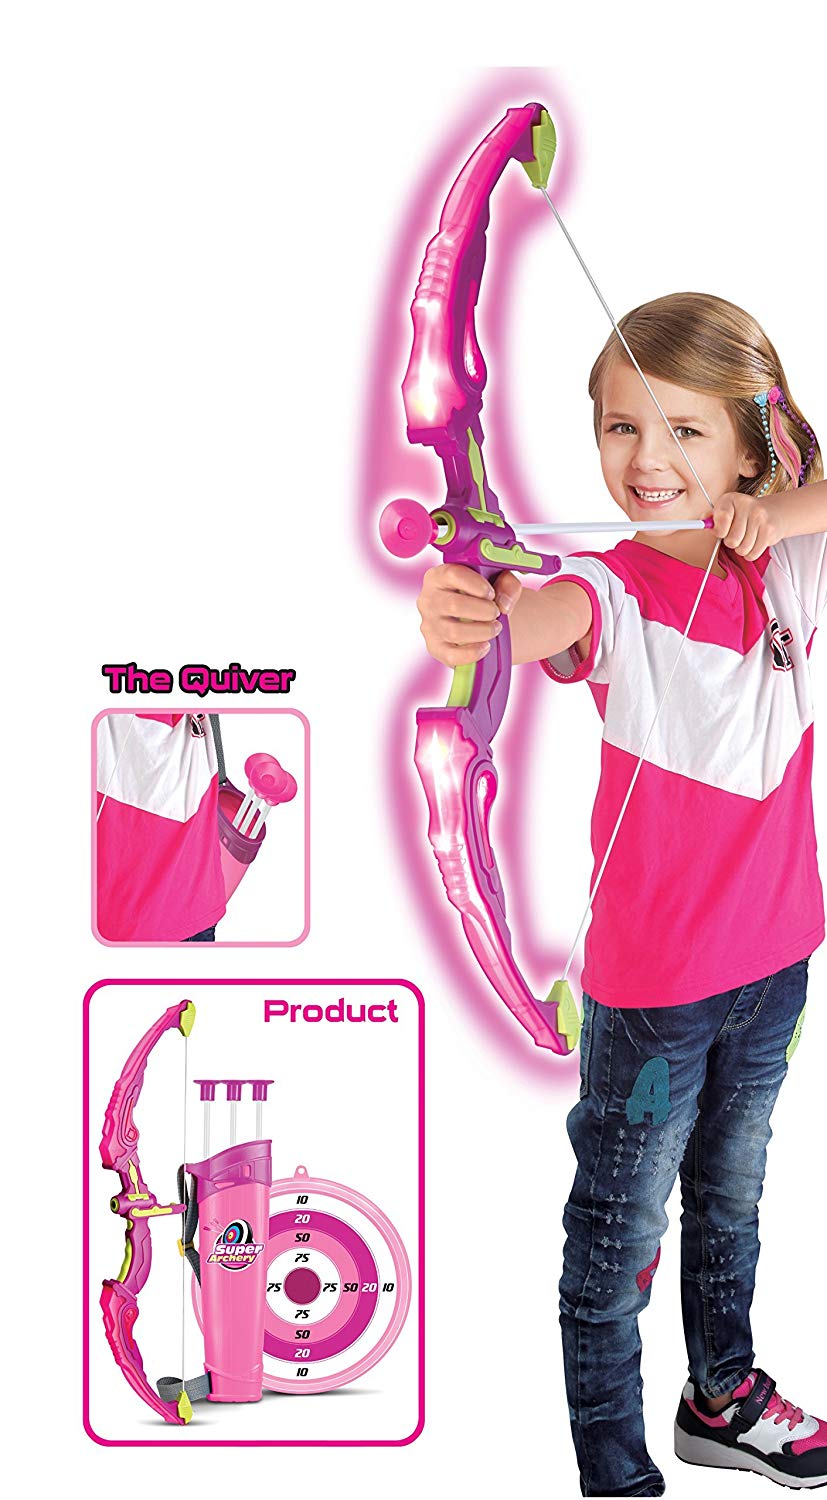 Light Up Archery Bow And Arrow Toy Set for Girls With 3 Suction Cup Arrows, Target, and Quiver